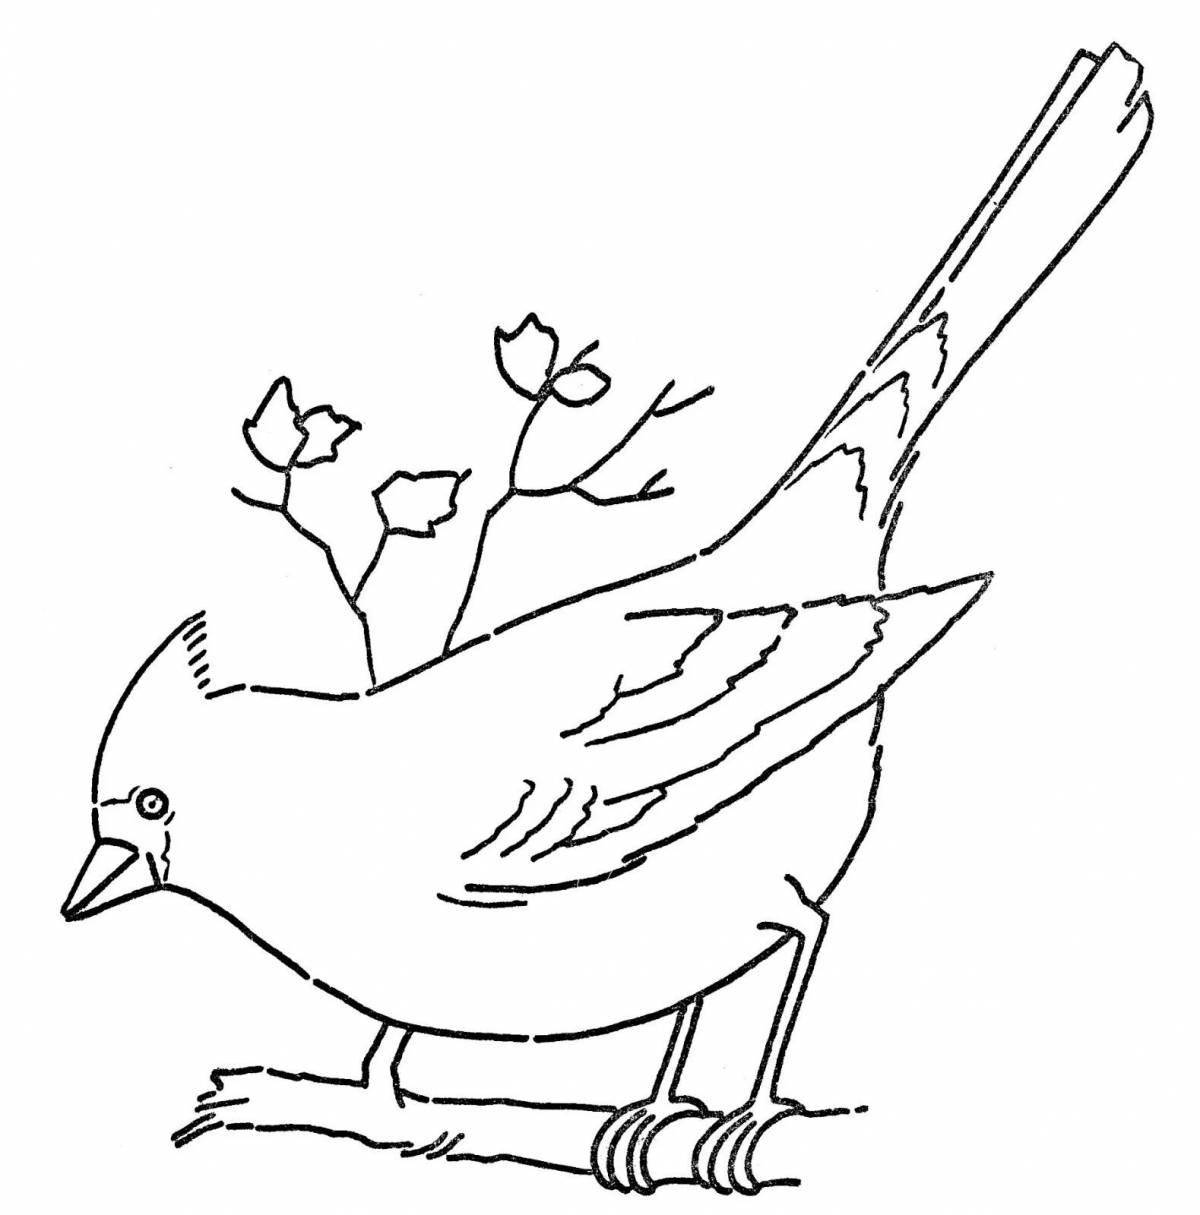 Adorable waxwing bird coloring page